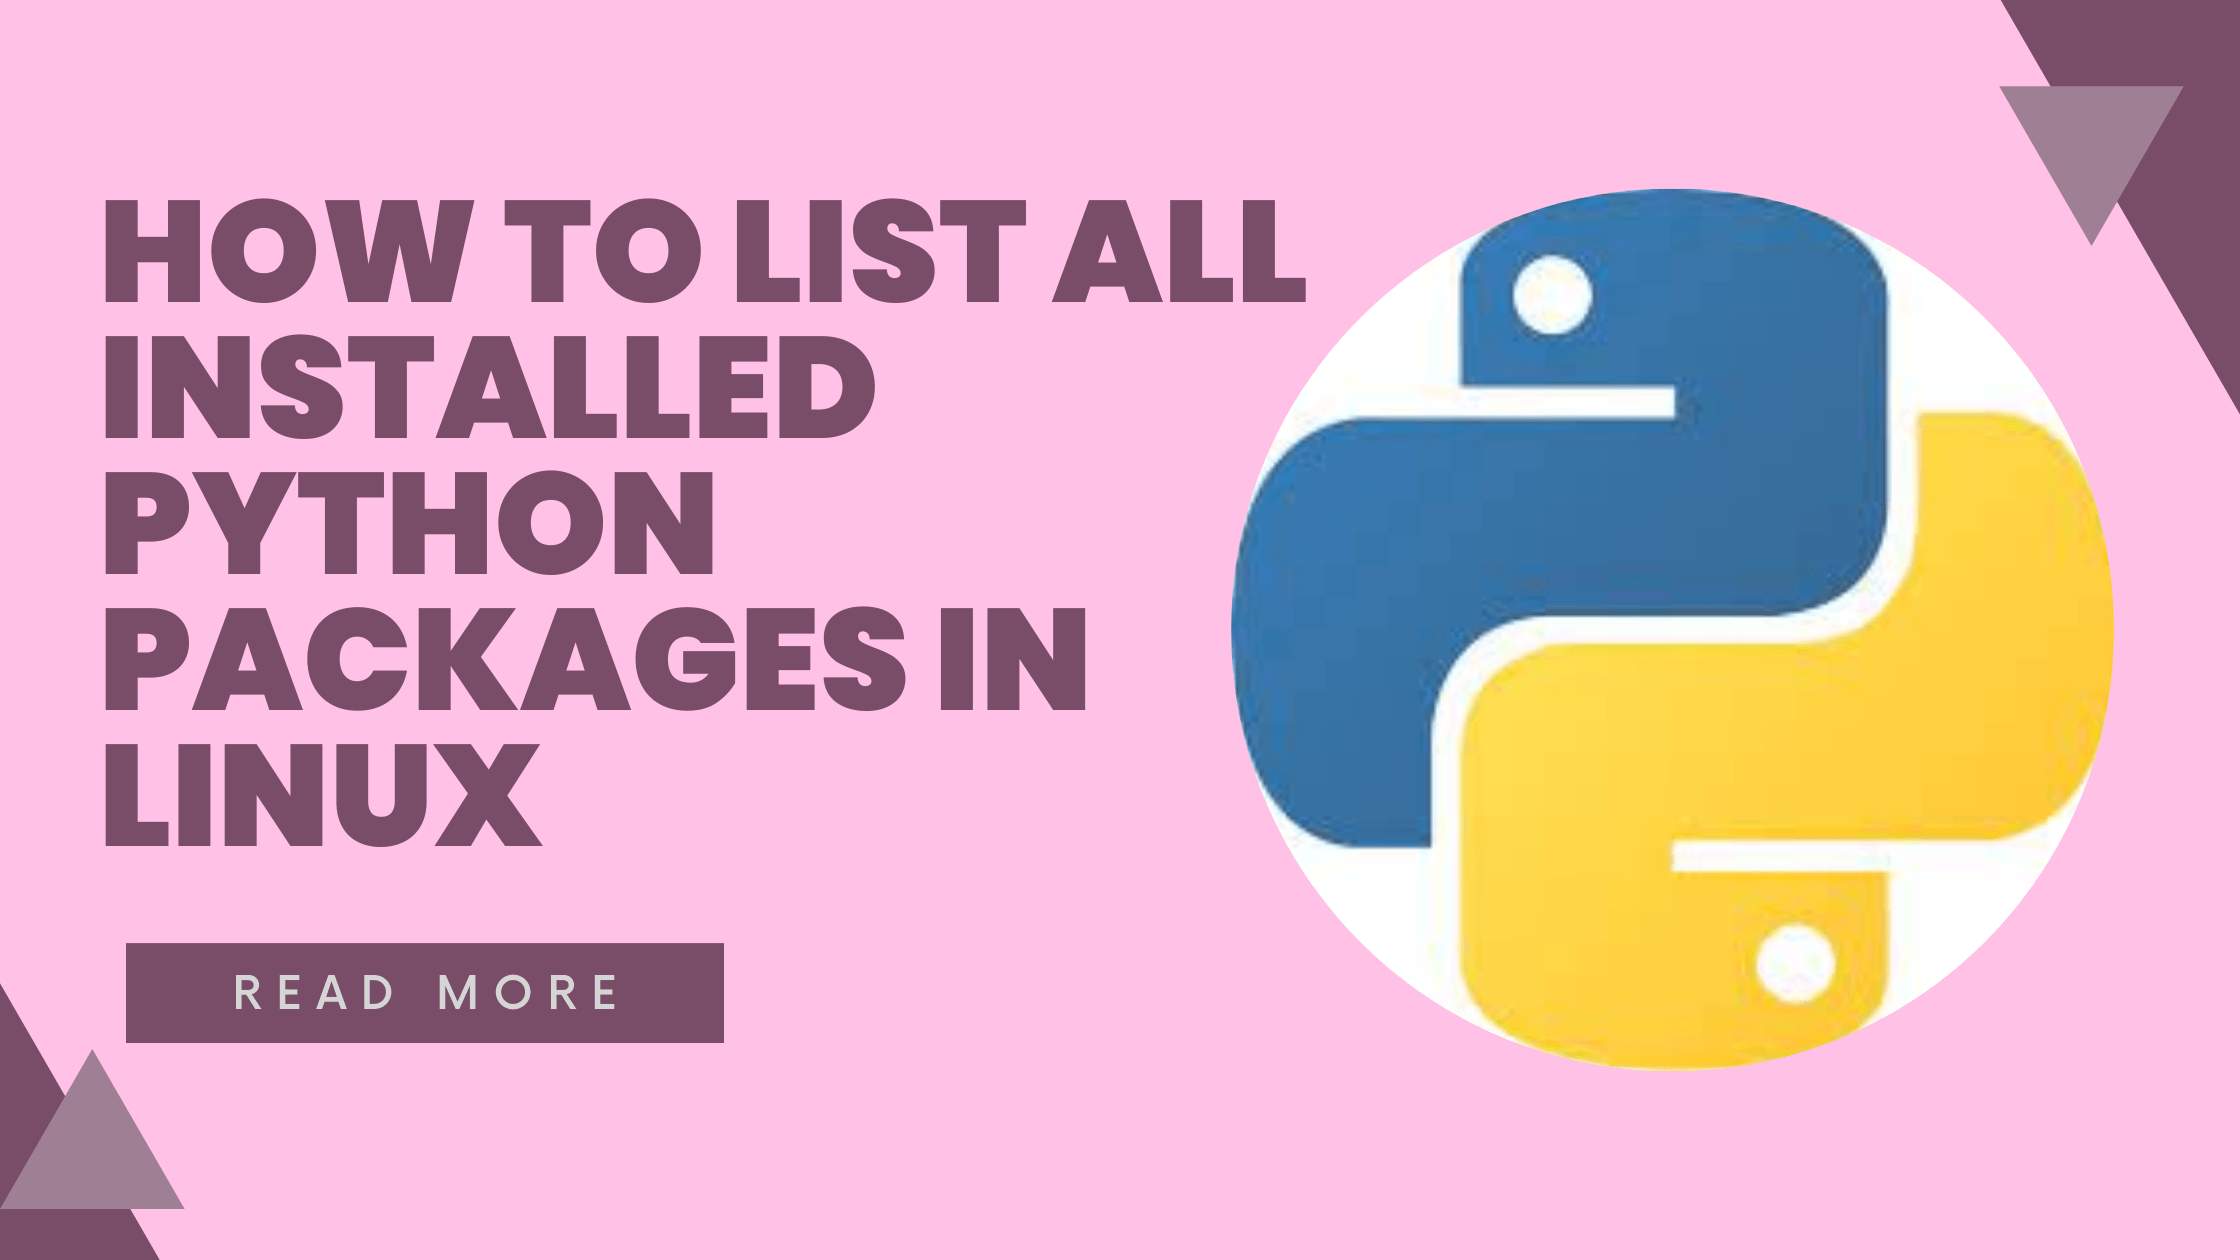 list all installed python packages